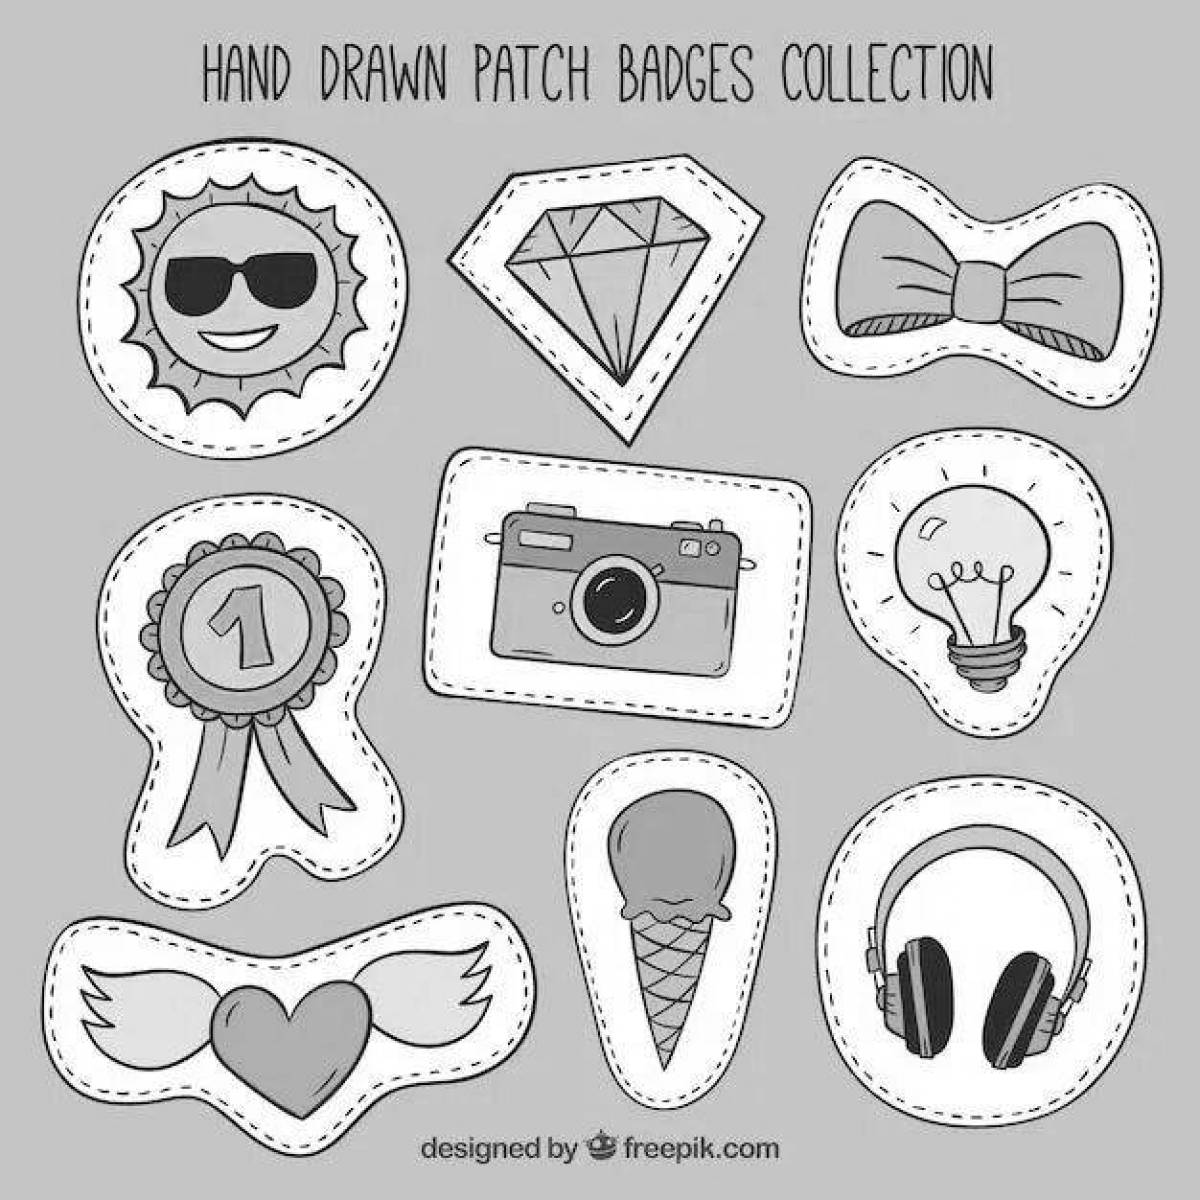 Fun patches for coloring pages